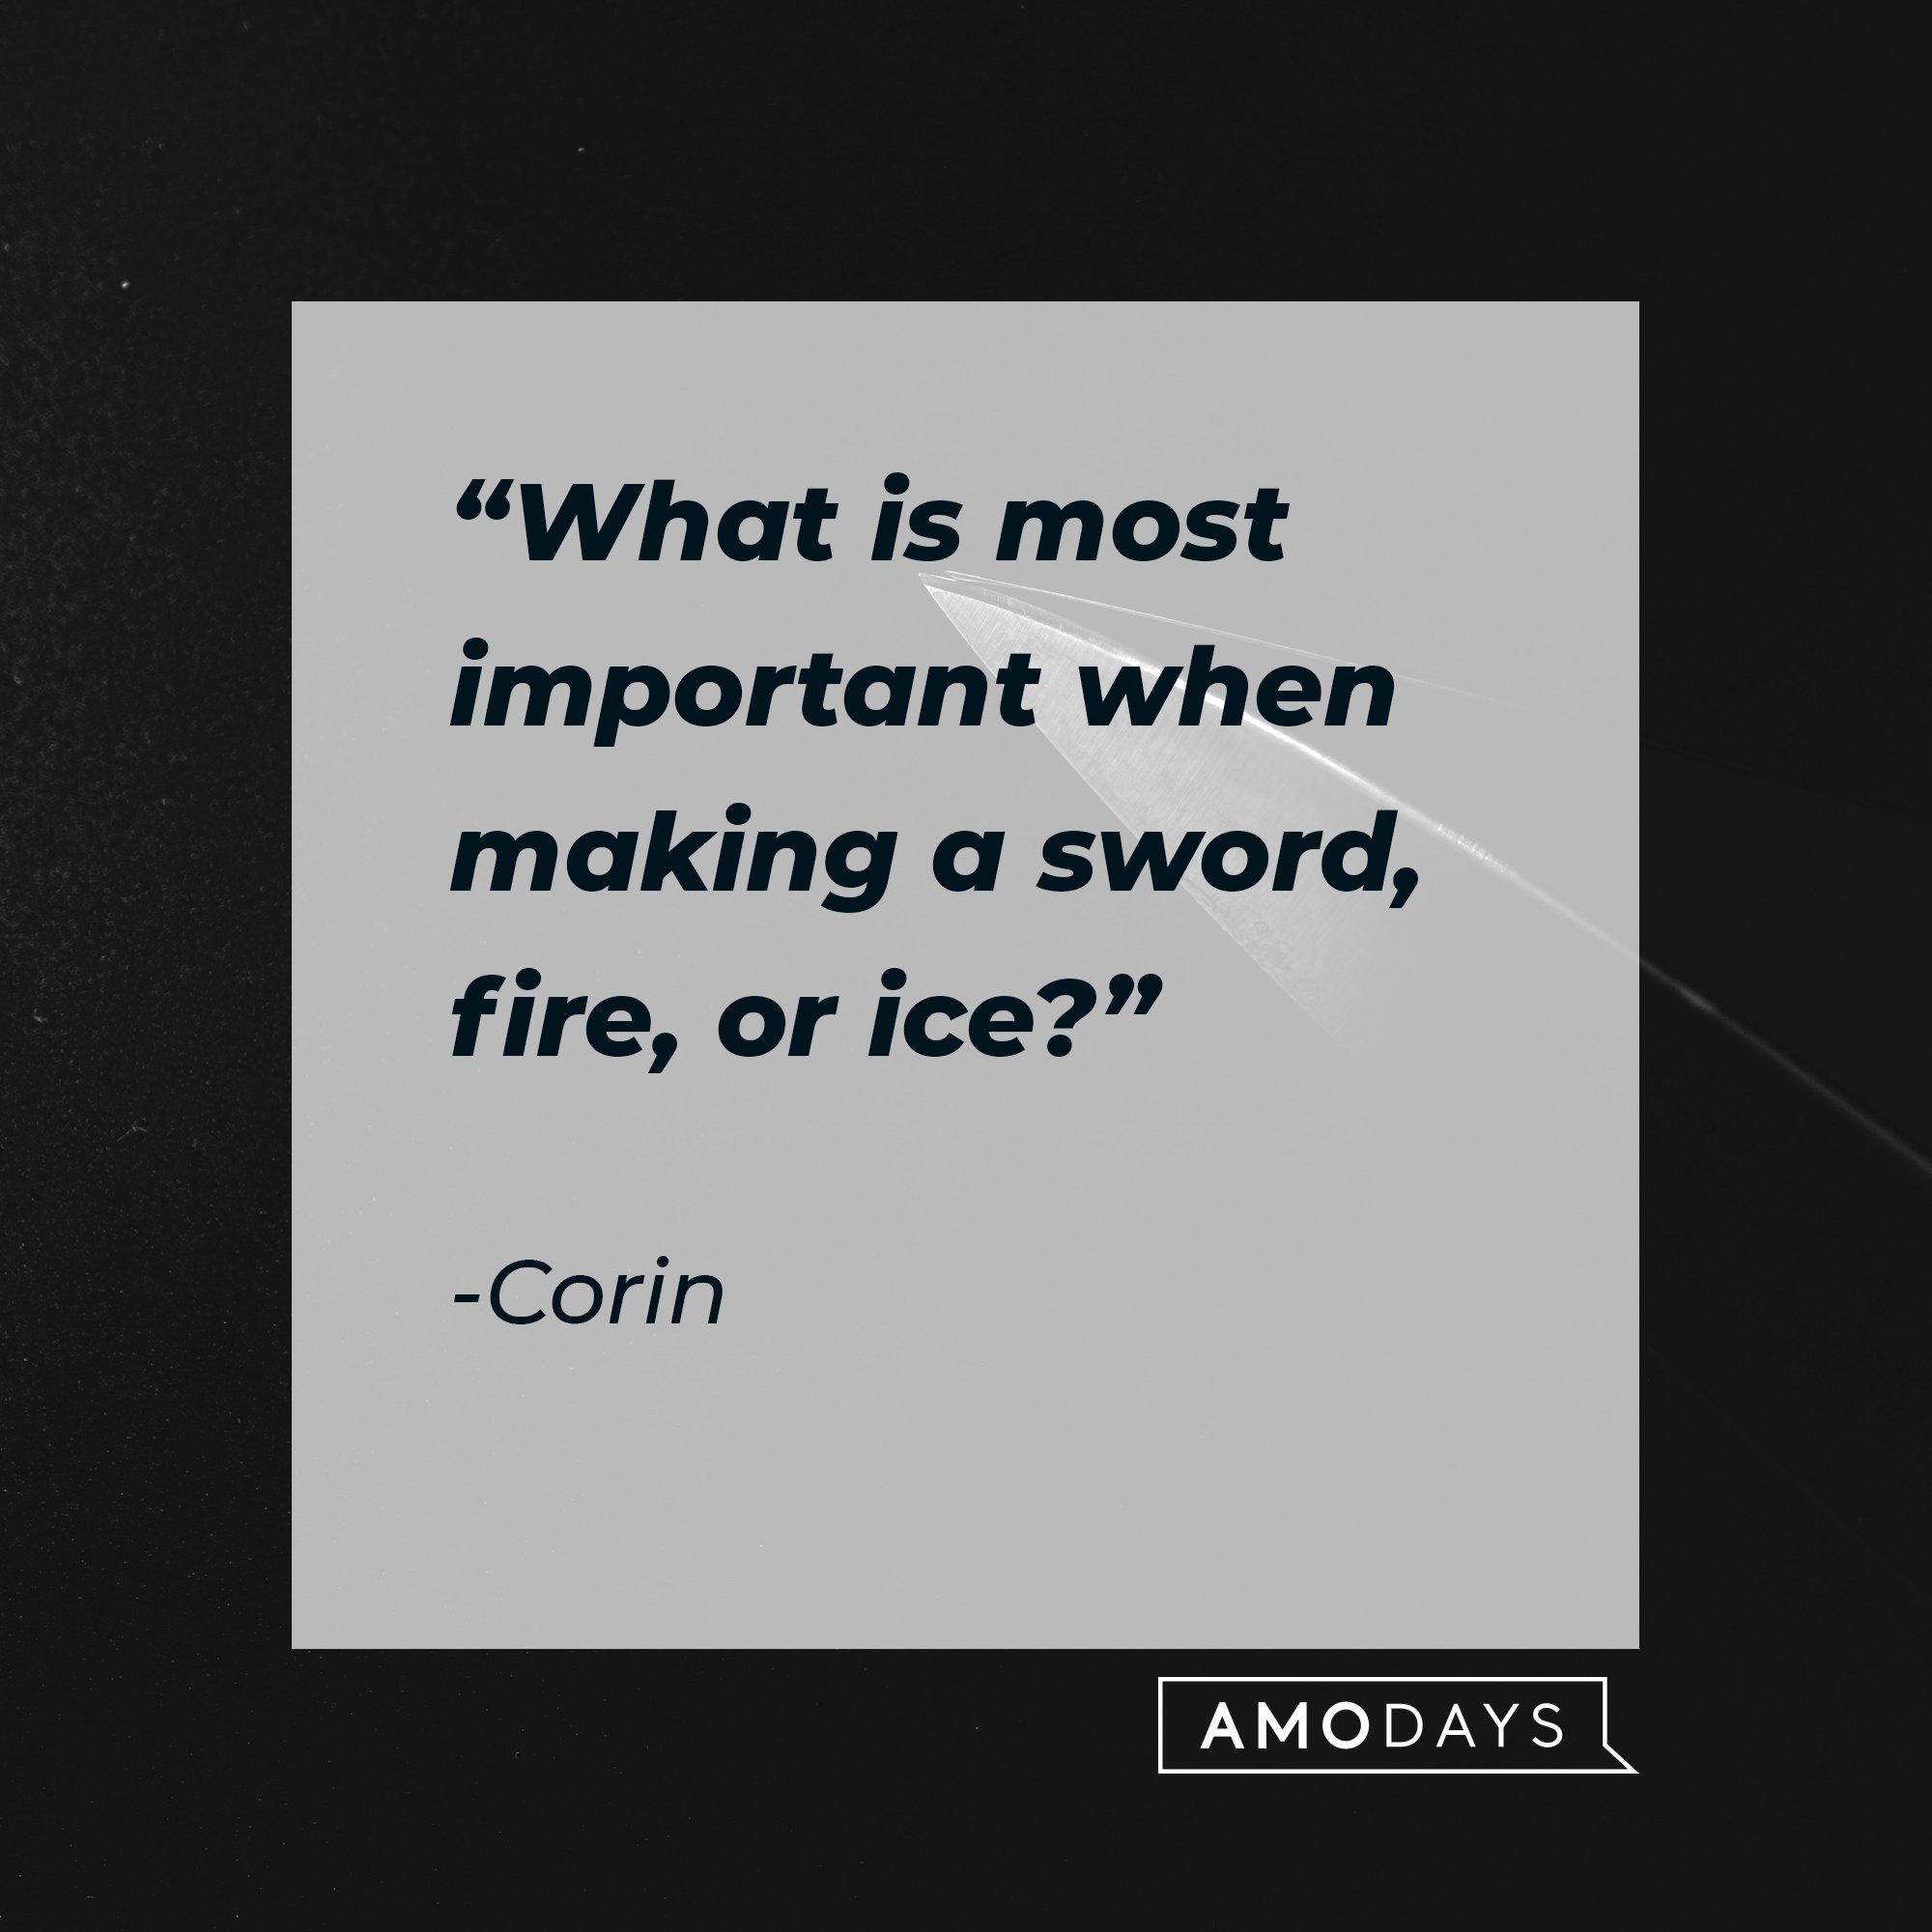 Corin's quote: “What is most important when making a sword, fire, or ice?” | Image: AmoDays